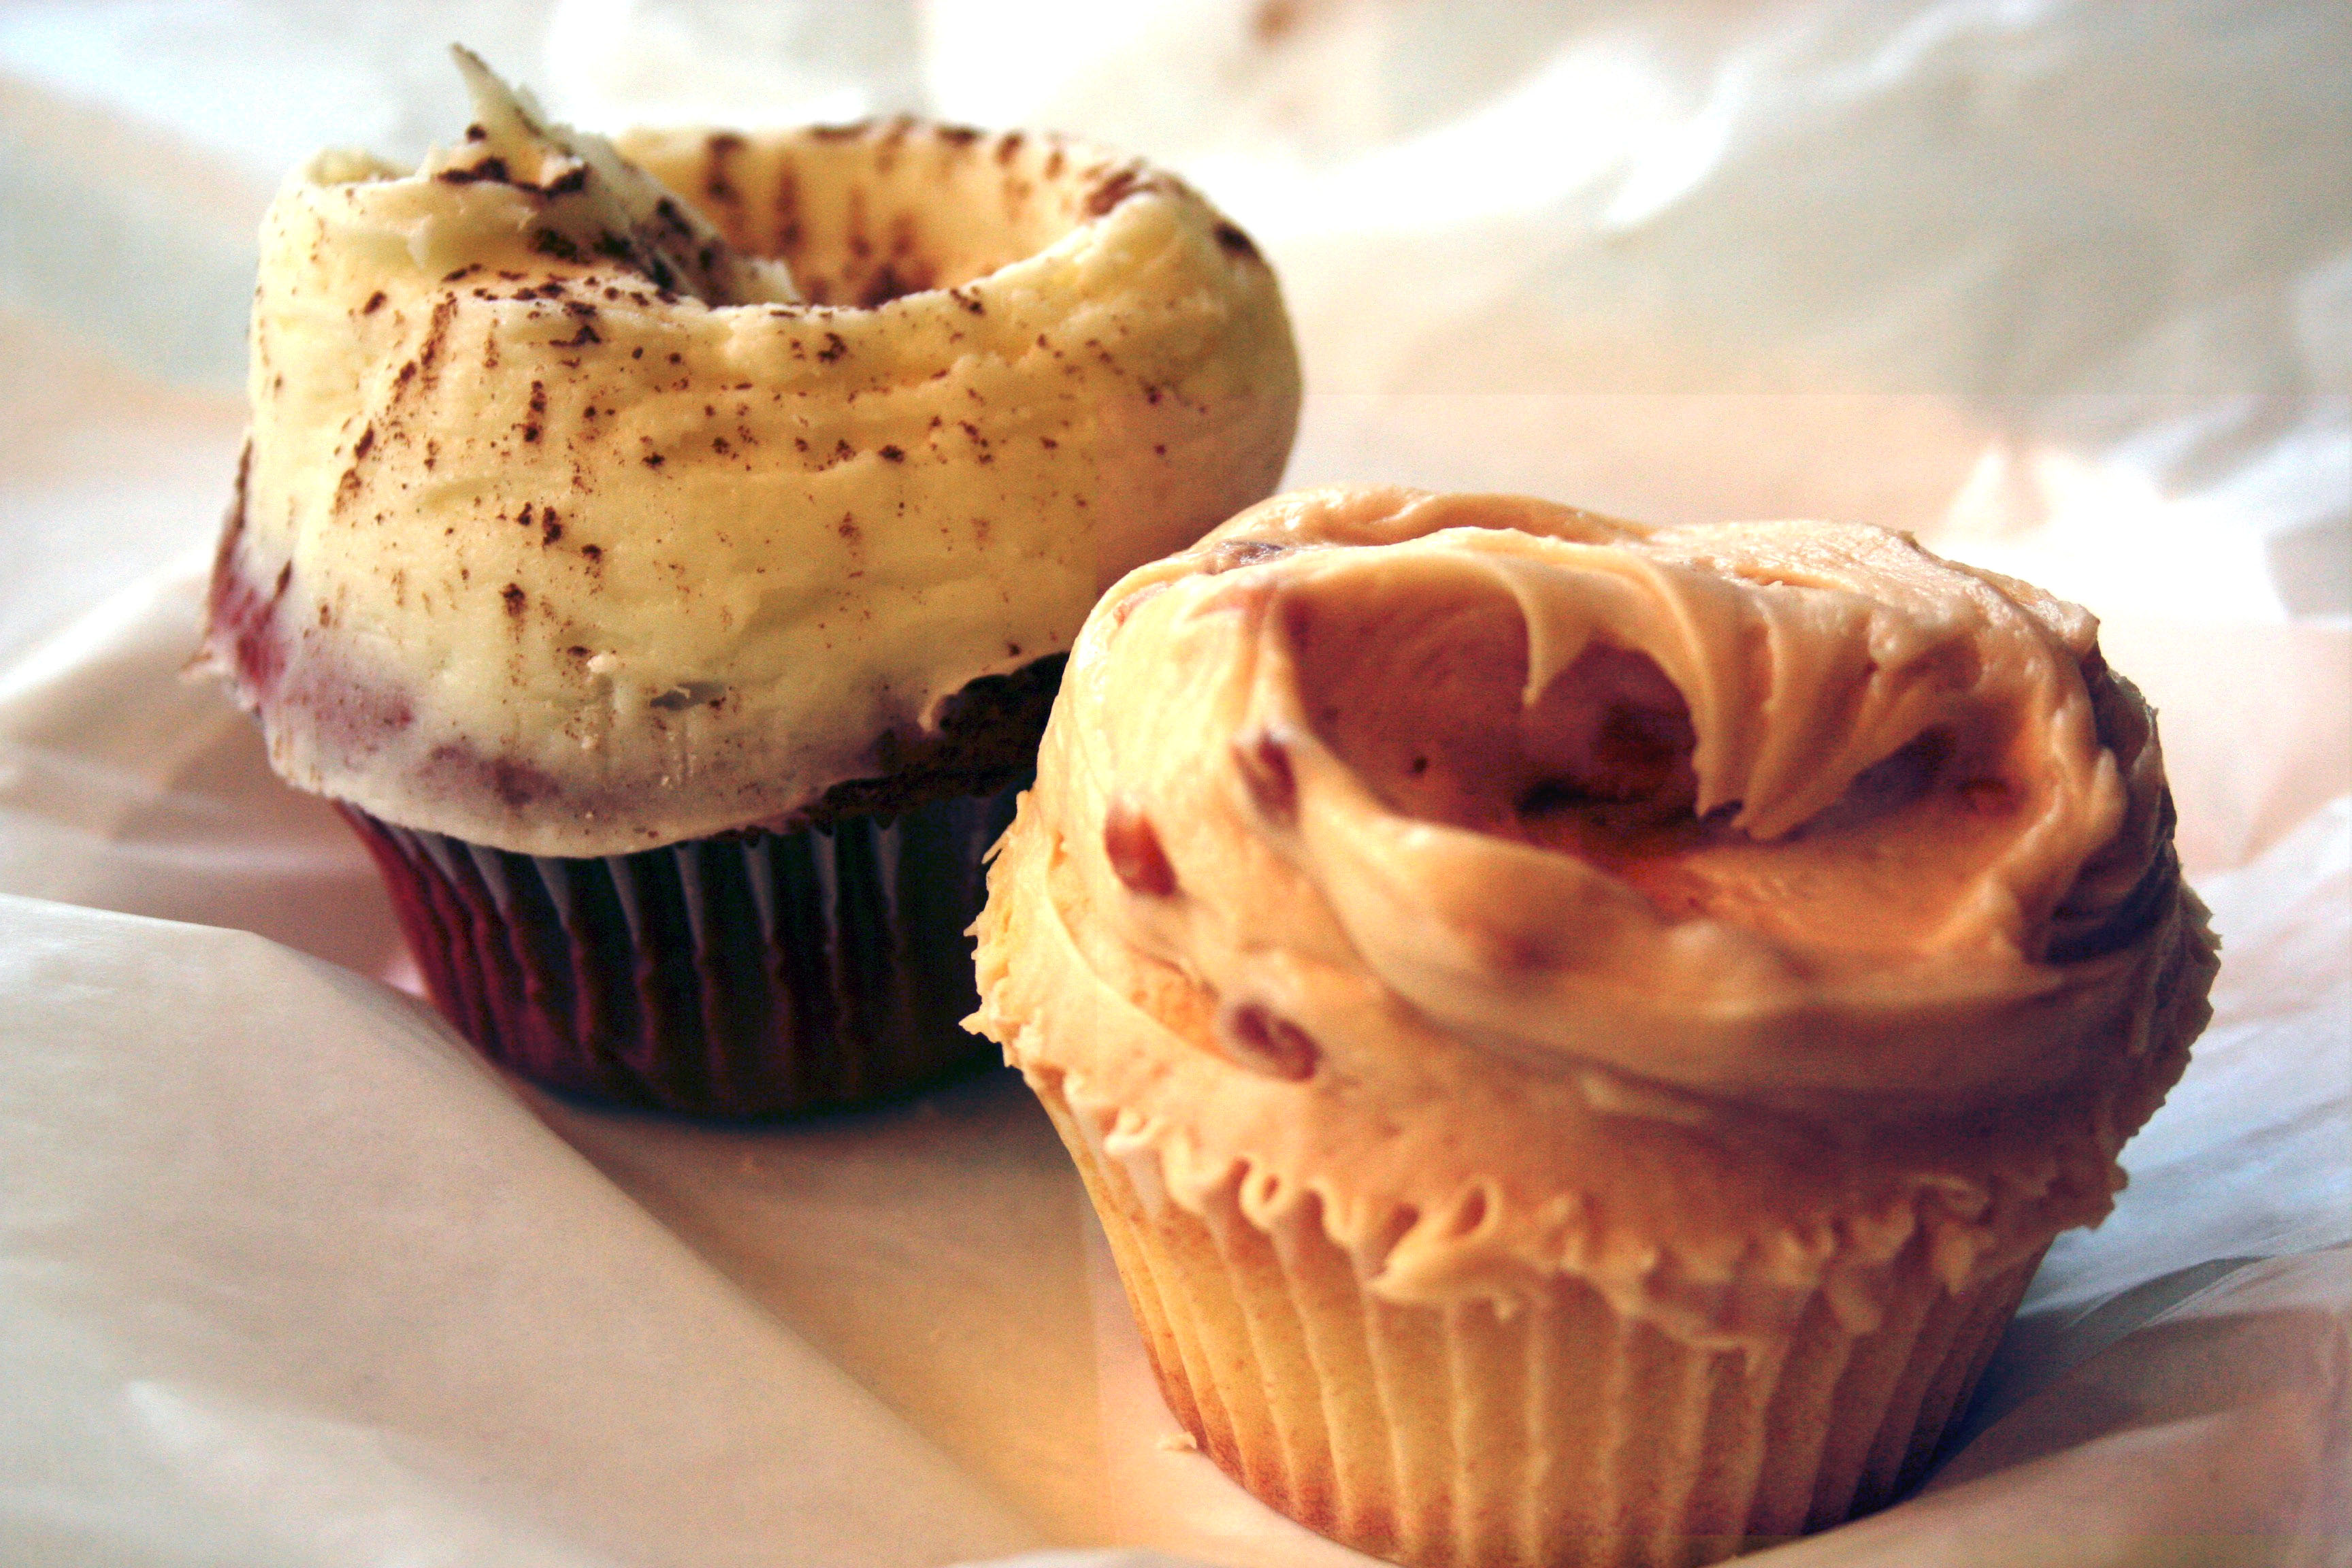 Peanut Butter and Red Velvet were my obvious picks at Buttercup Bakery. Photo: G.G. Merkel